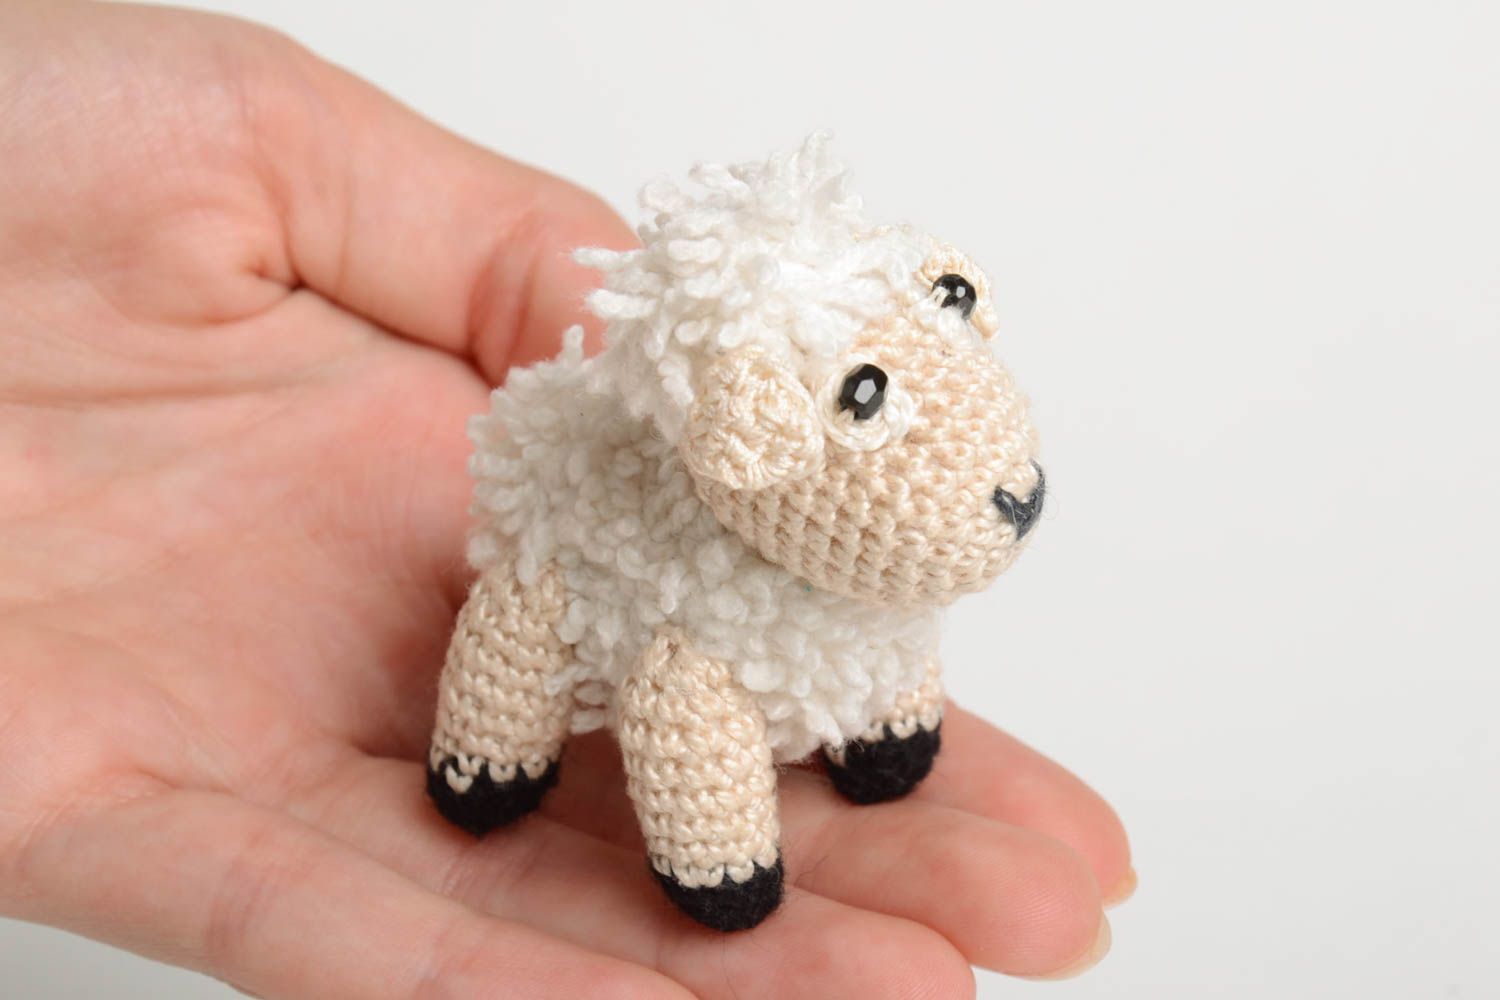 Handmade toy designer toy decor ideas crocheted toy gift for baby animal toy photo 5